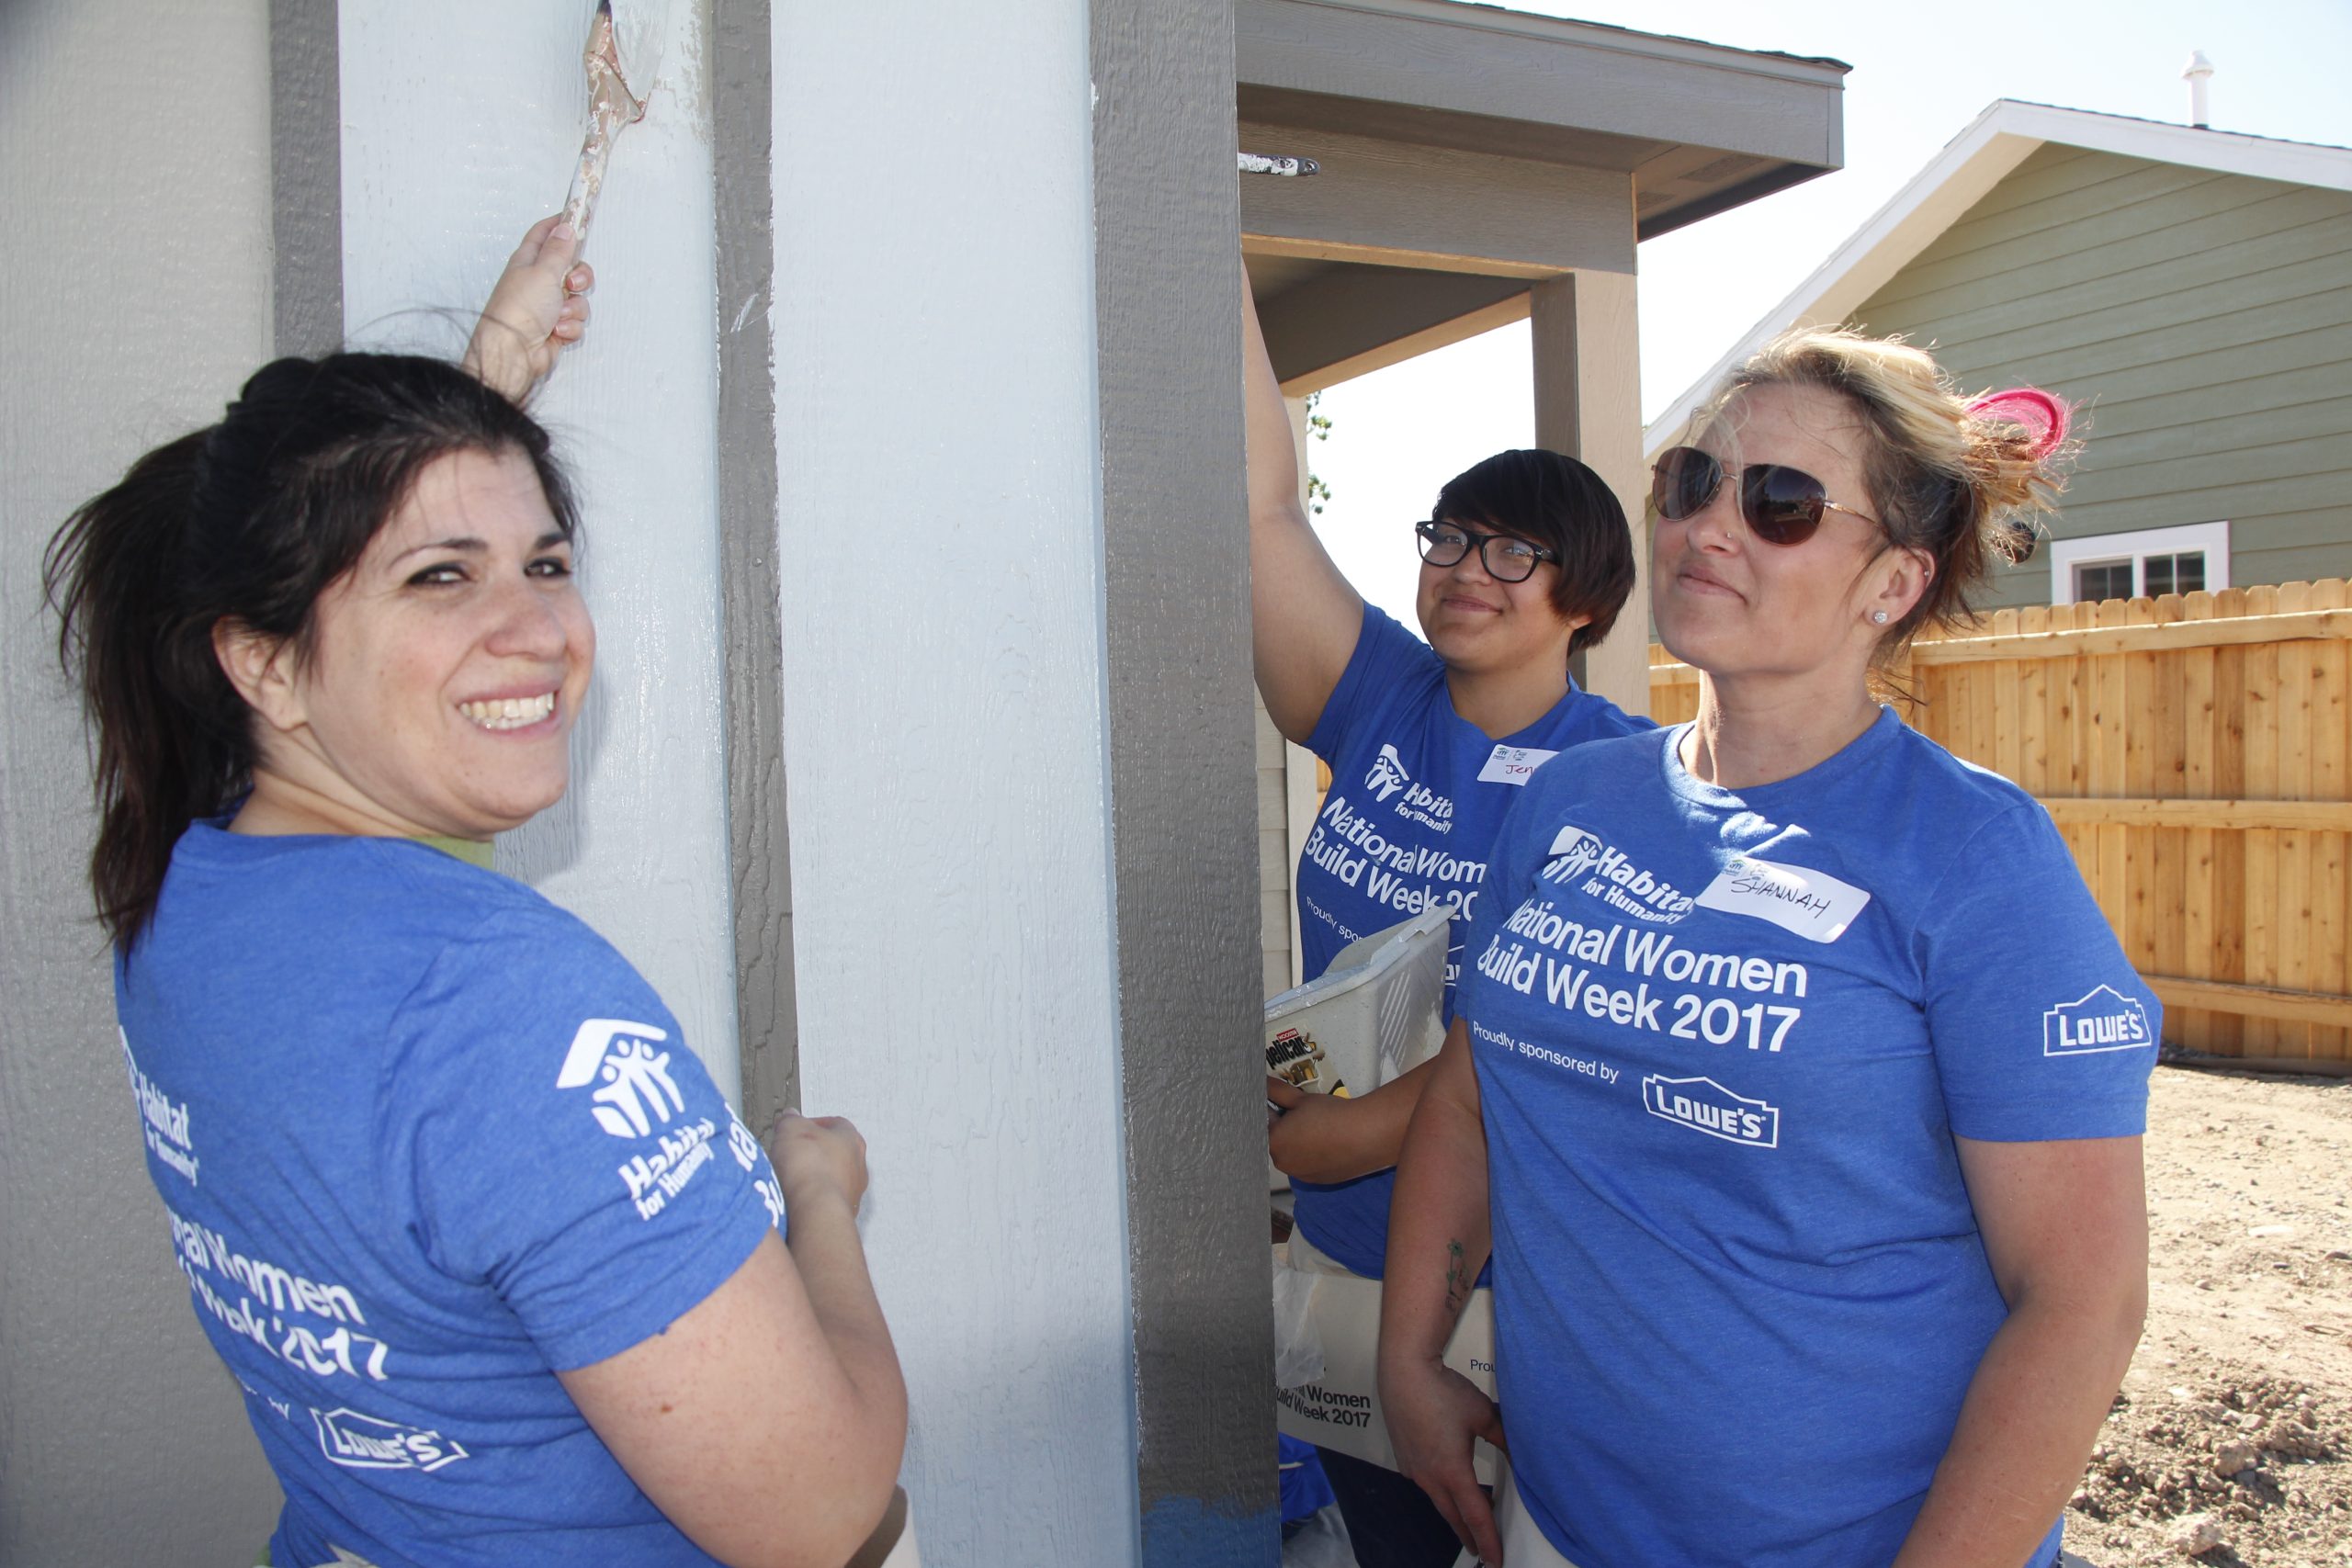 Rose volunteering with habitat for humanity